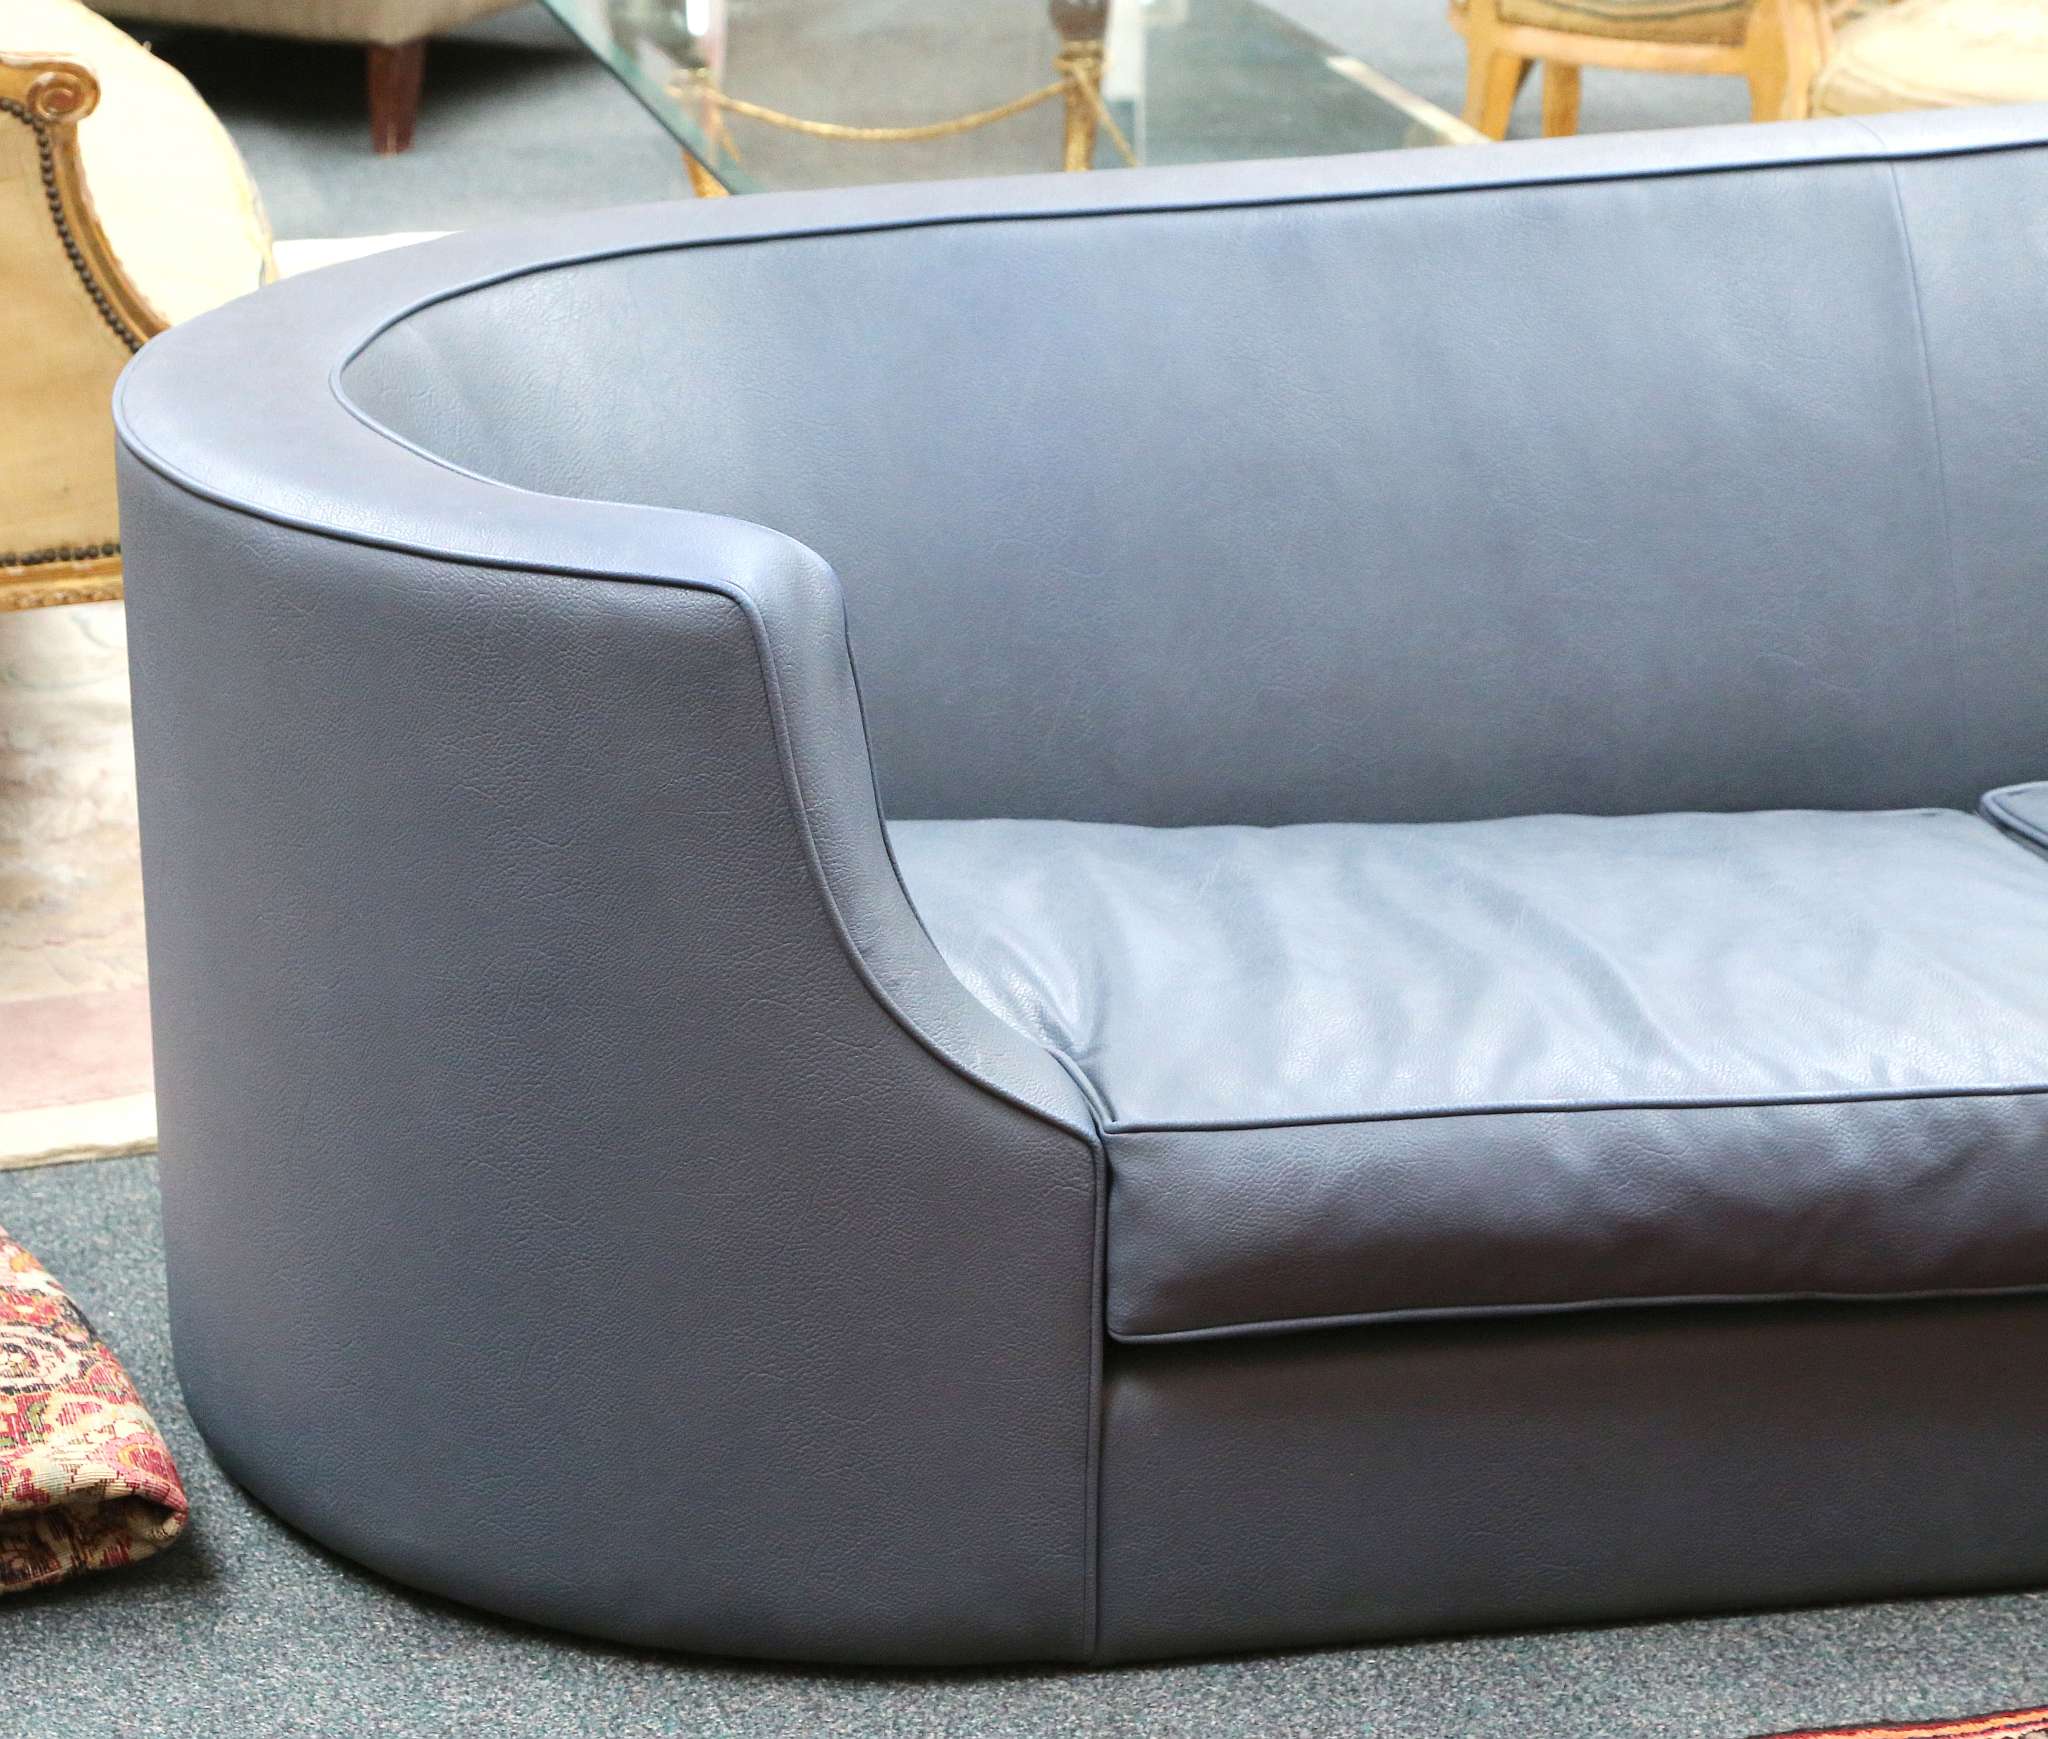 A Heals blue leather upholstered sofa with C end arm rests, 147cm w x 100cm d x 67cm h - Image 3 of 3